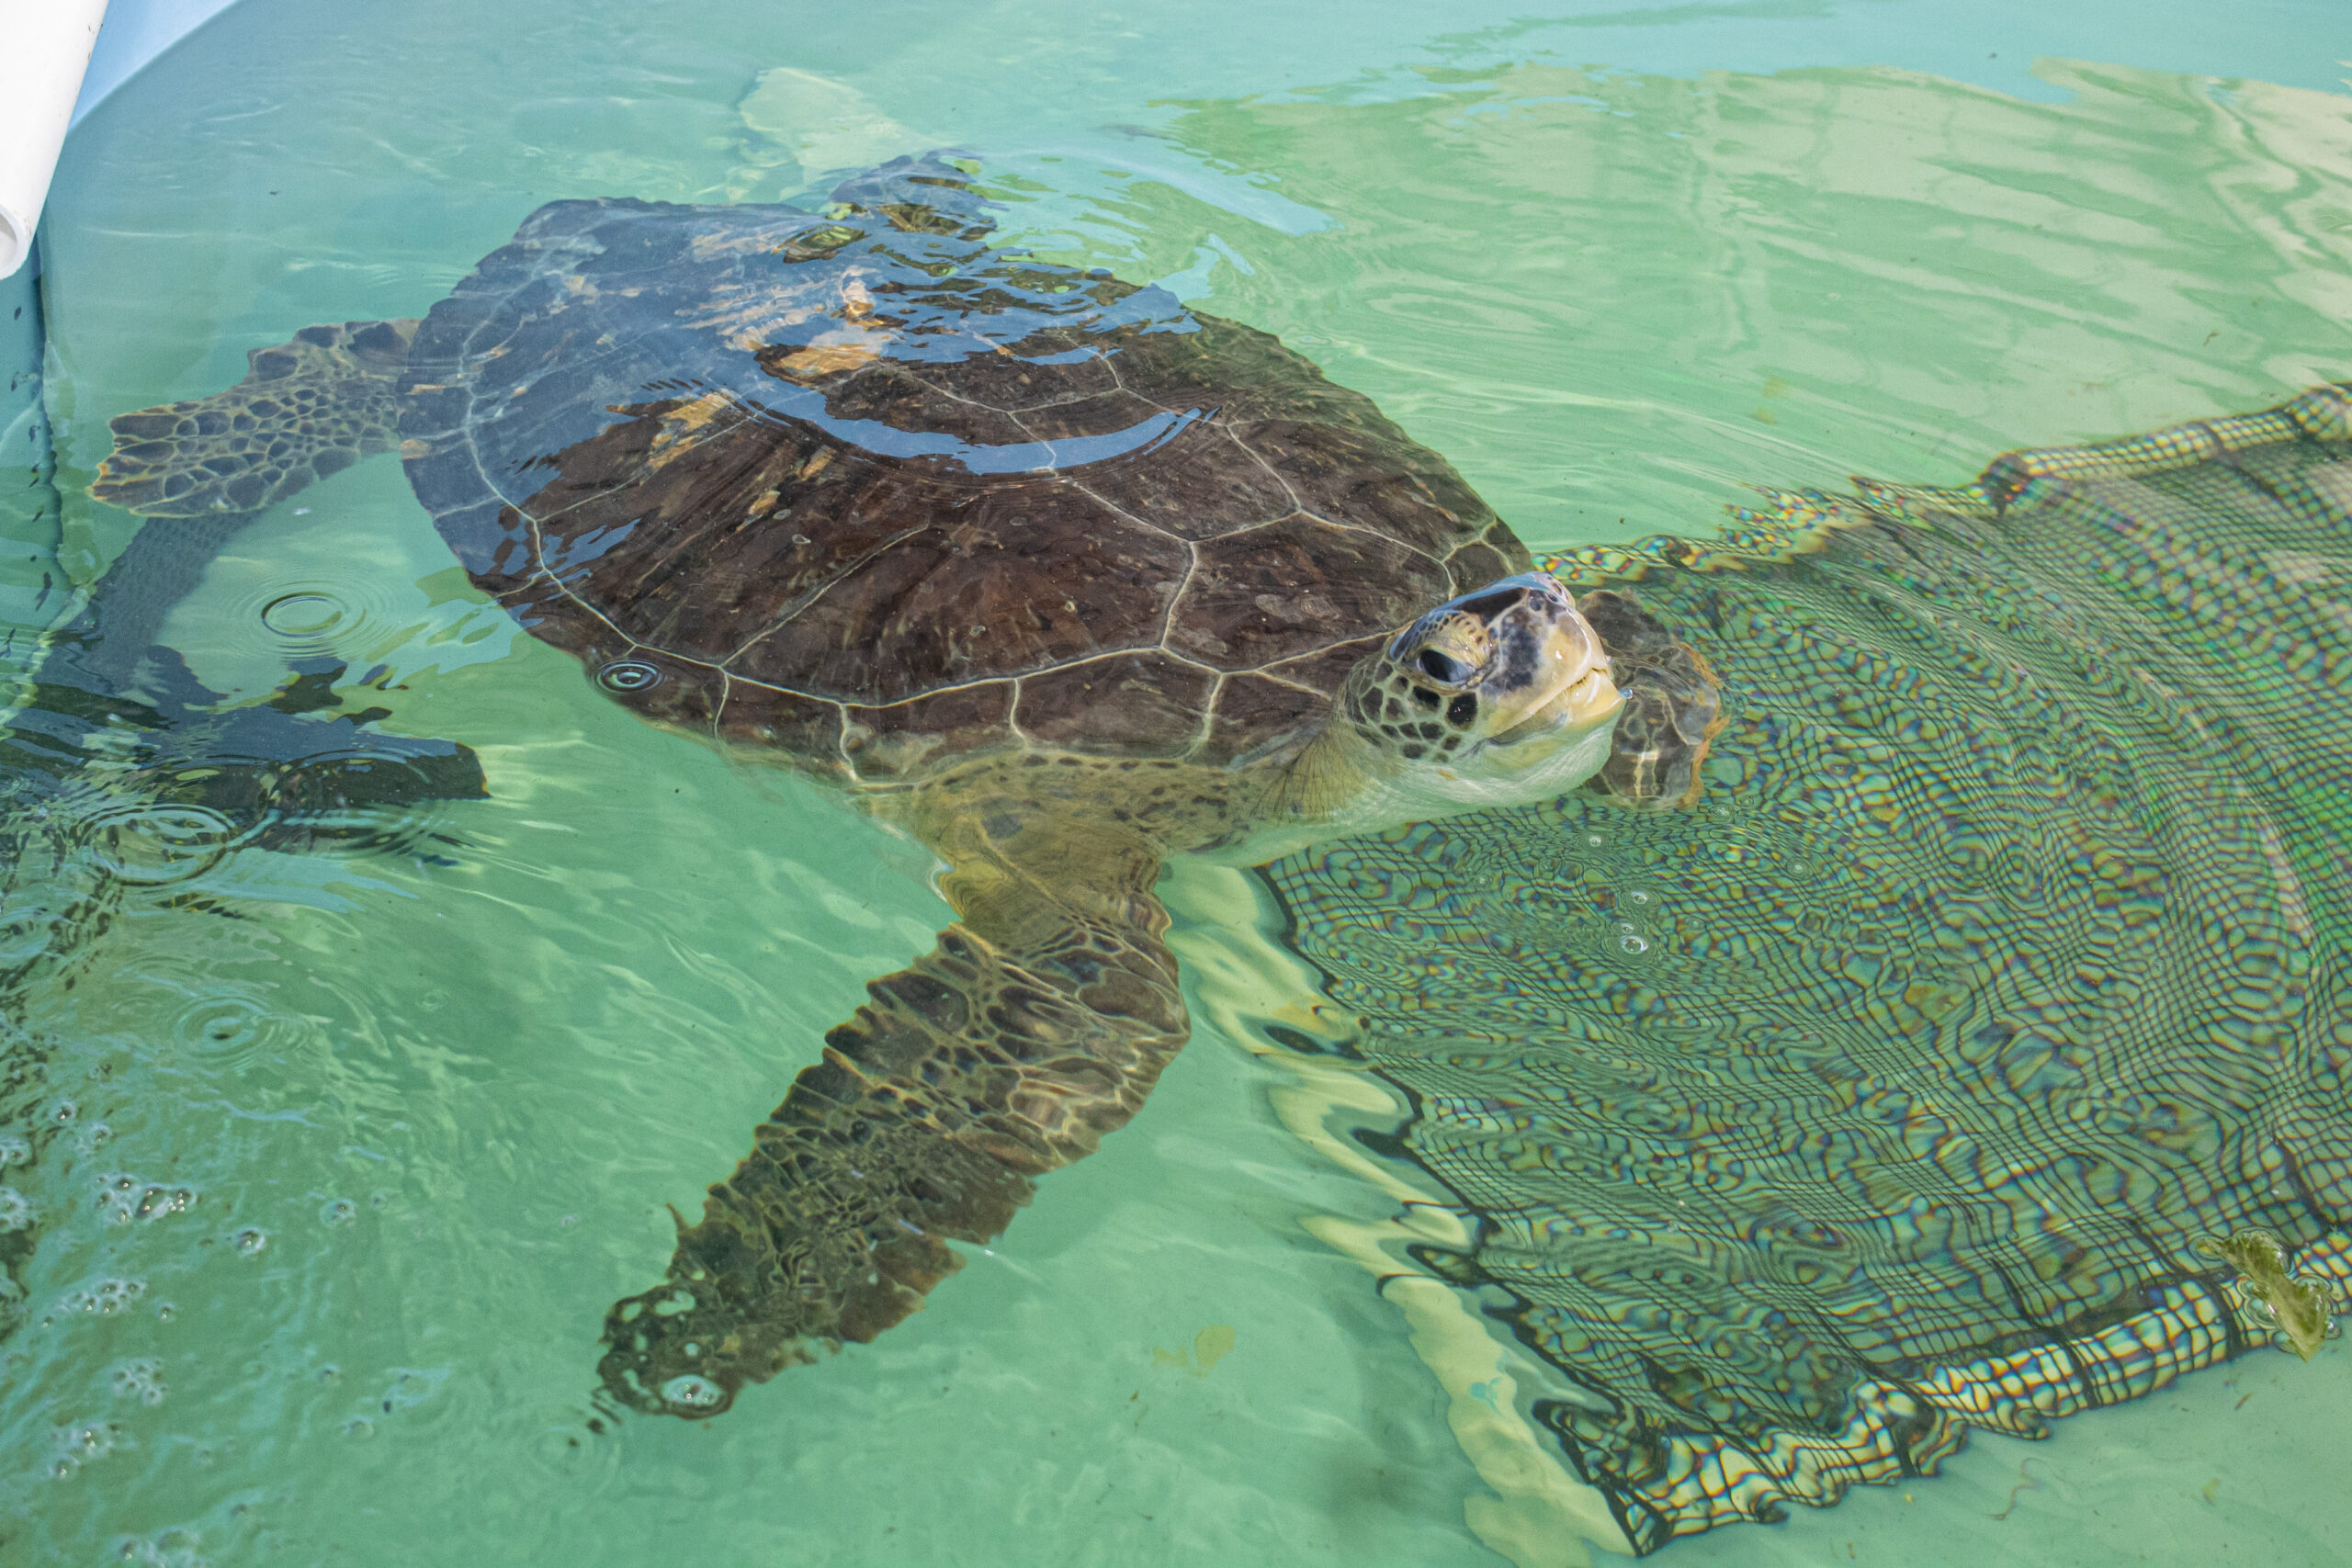 A large sea turtle in water